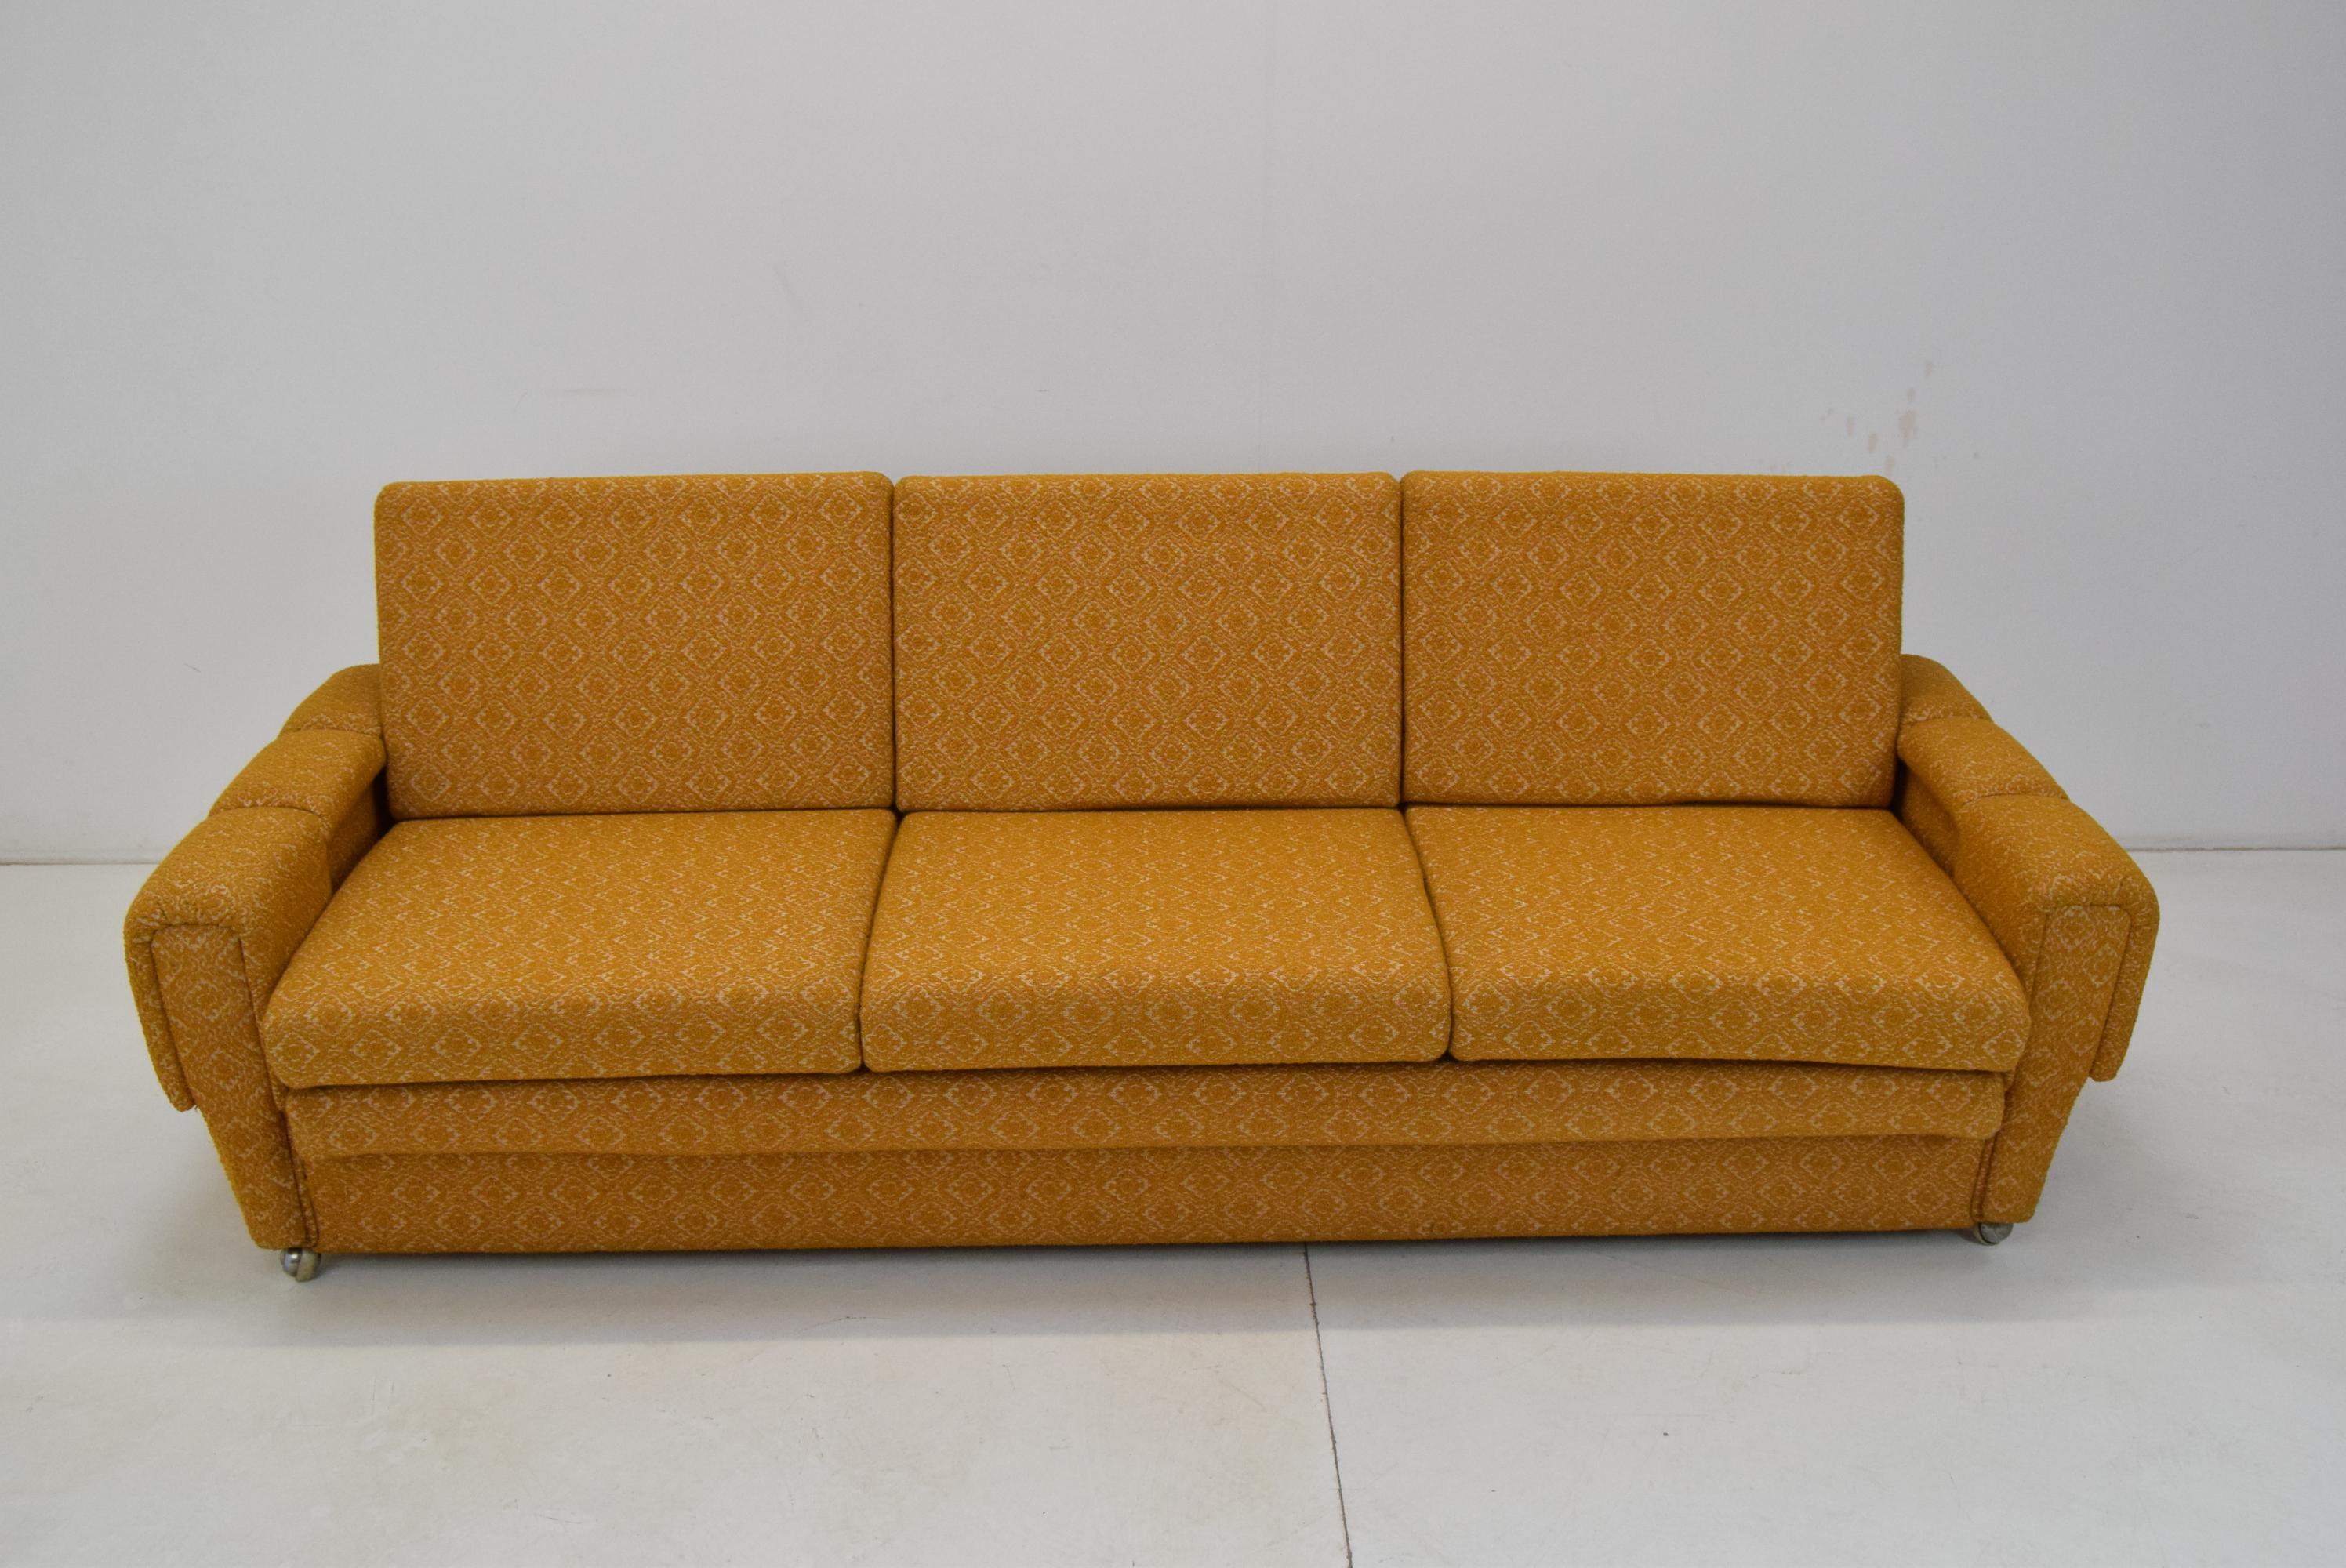 Made in Czechoslovakia
Made of Fabric
Dimensions when unfolded, depth 100cm, length 184cm
Good Original condition.